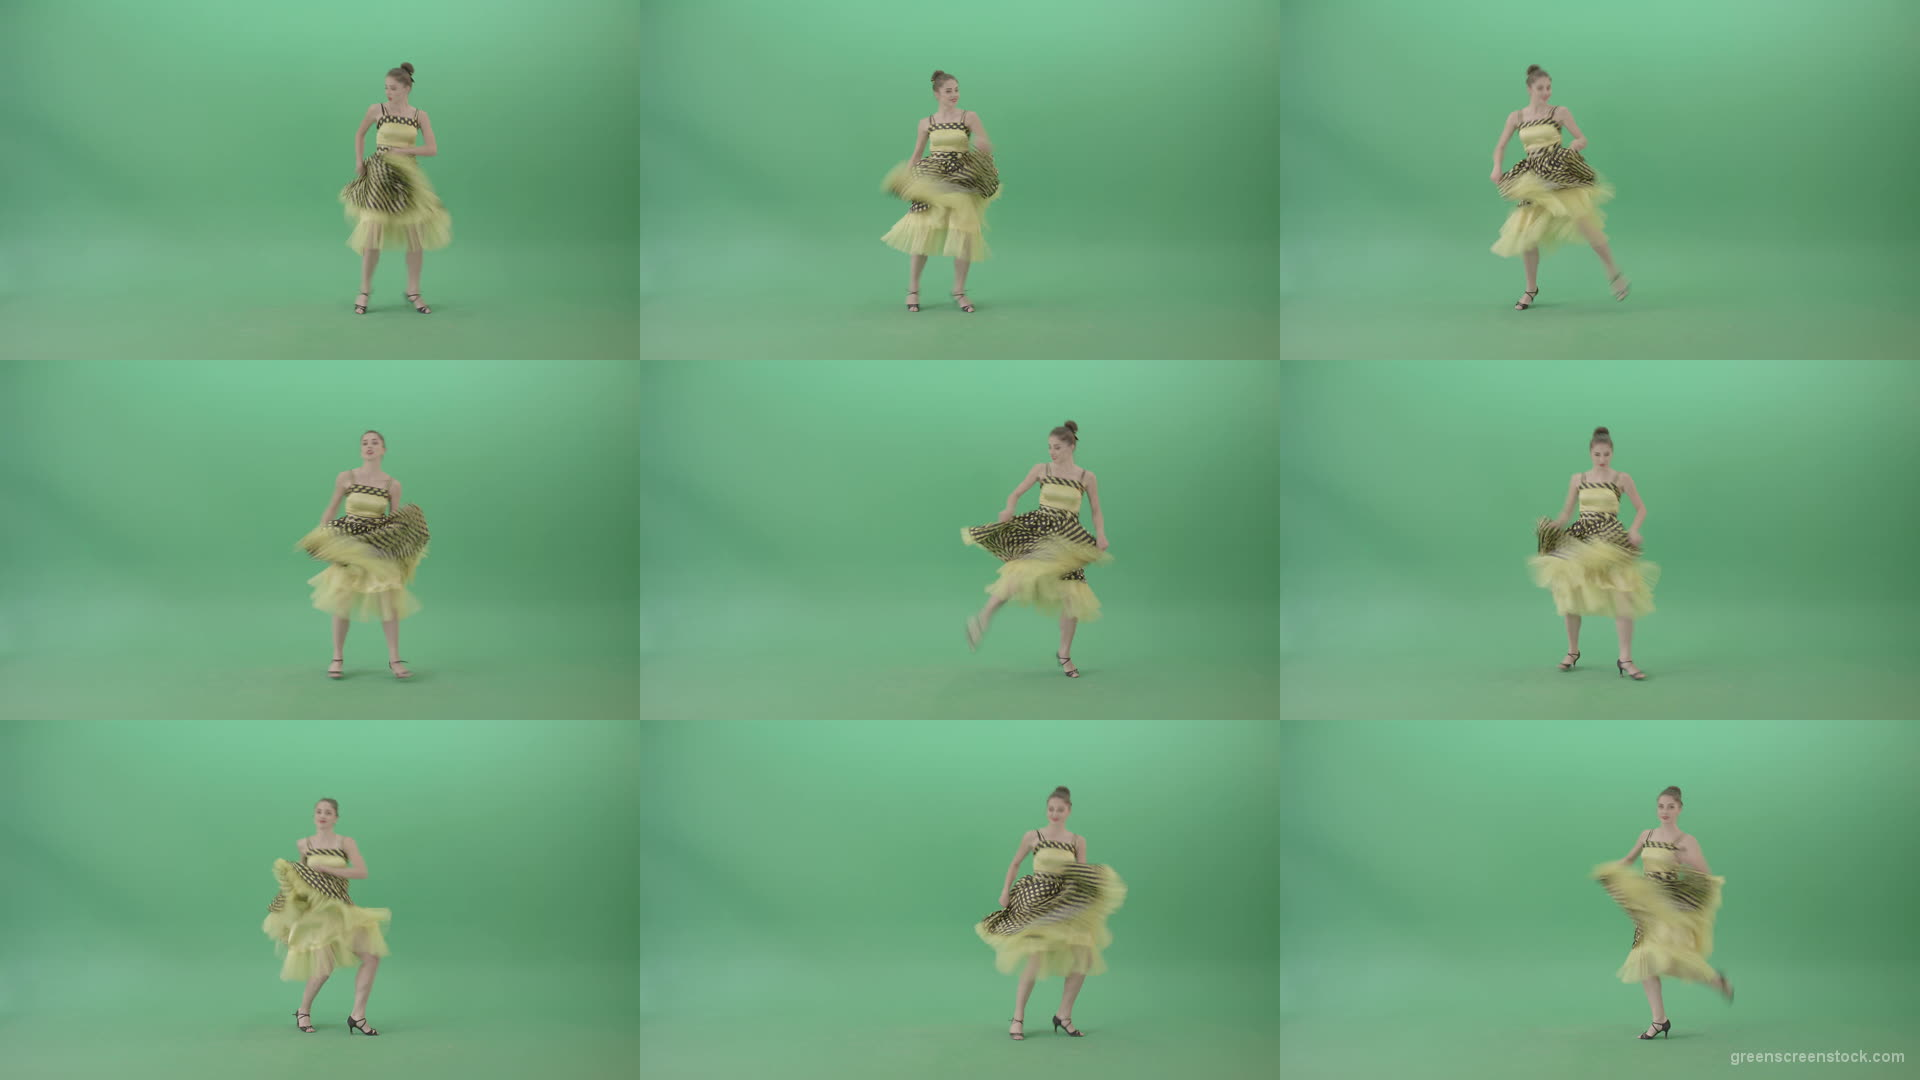 Elegant-Girl-in-Yellow-dress-Dancing-Boogie-woogie-and-chill-on-Green-Screen-4K-Video-Footage-1920 Green Screen Stock